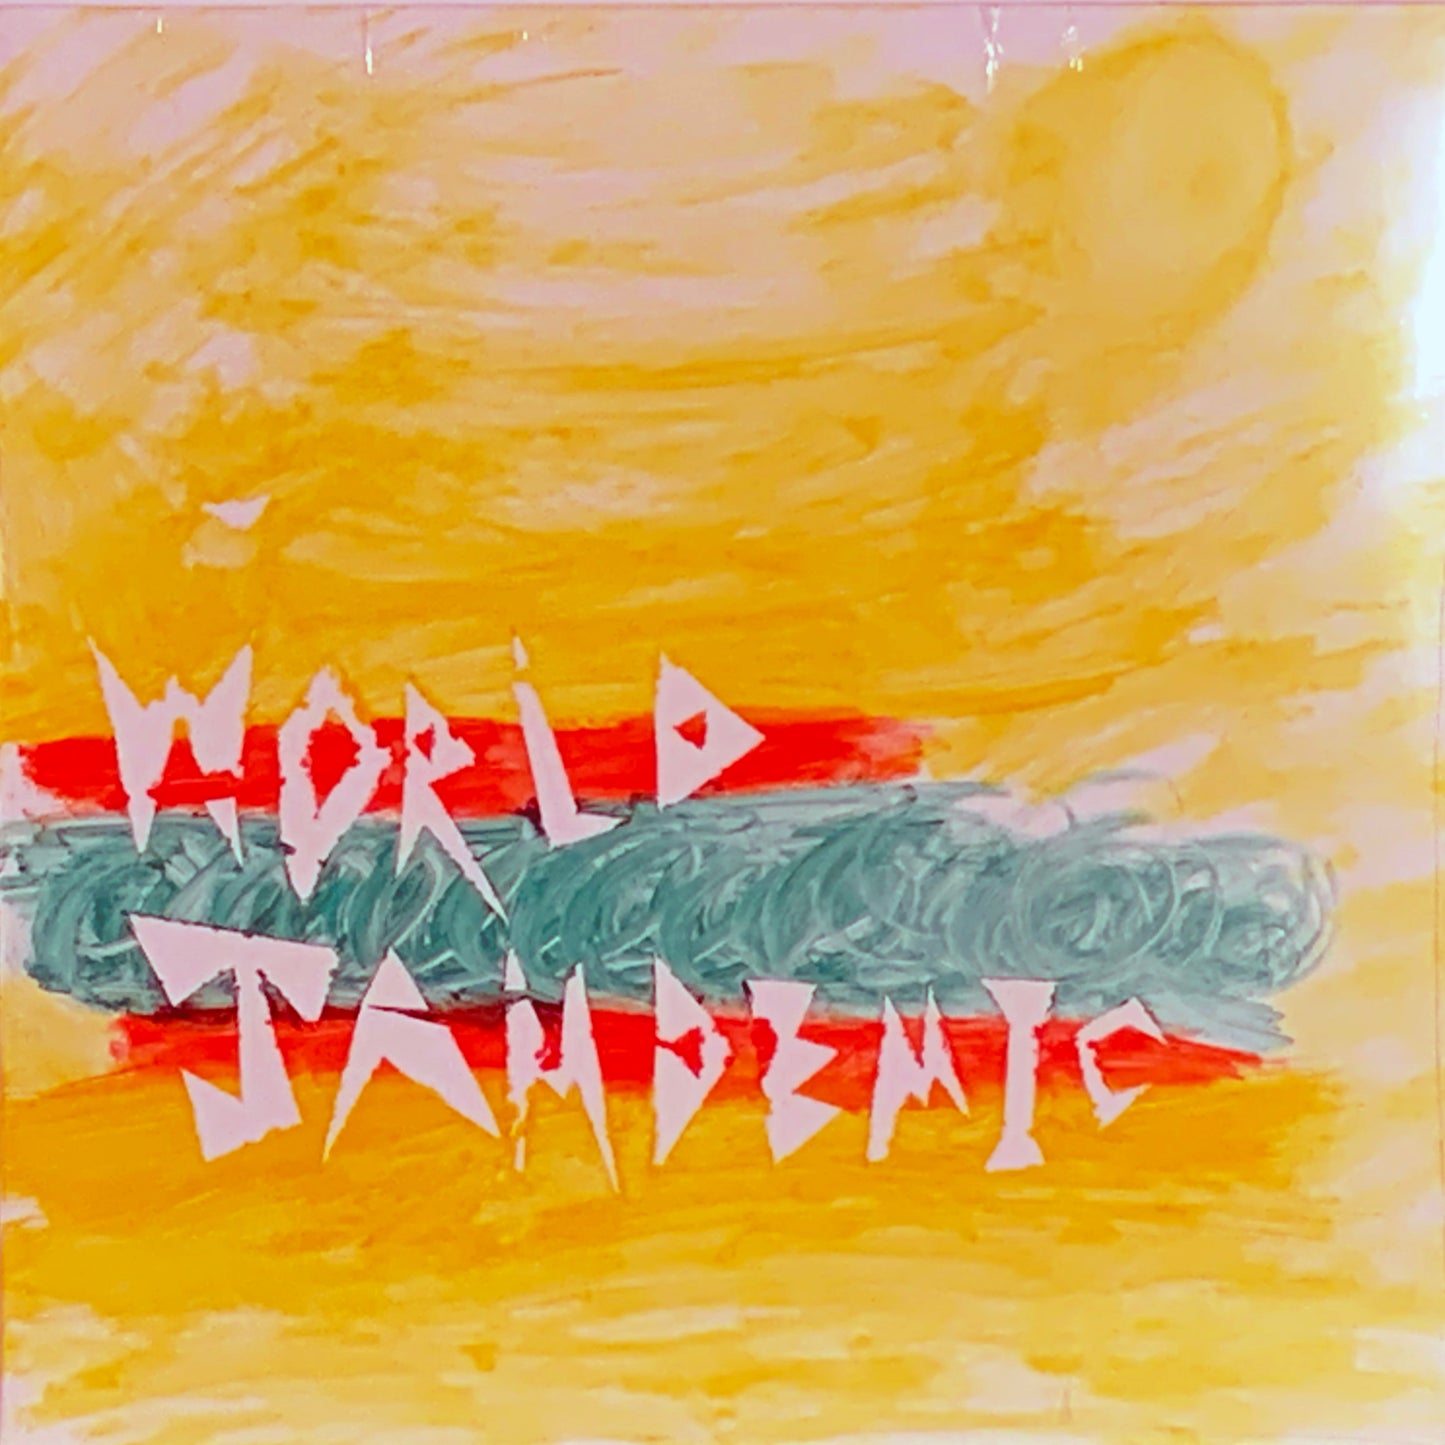 World Jamdemic (vinyl record) - Hand painted cover by Justin James Bridges 2/25